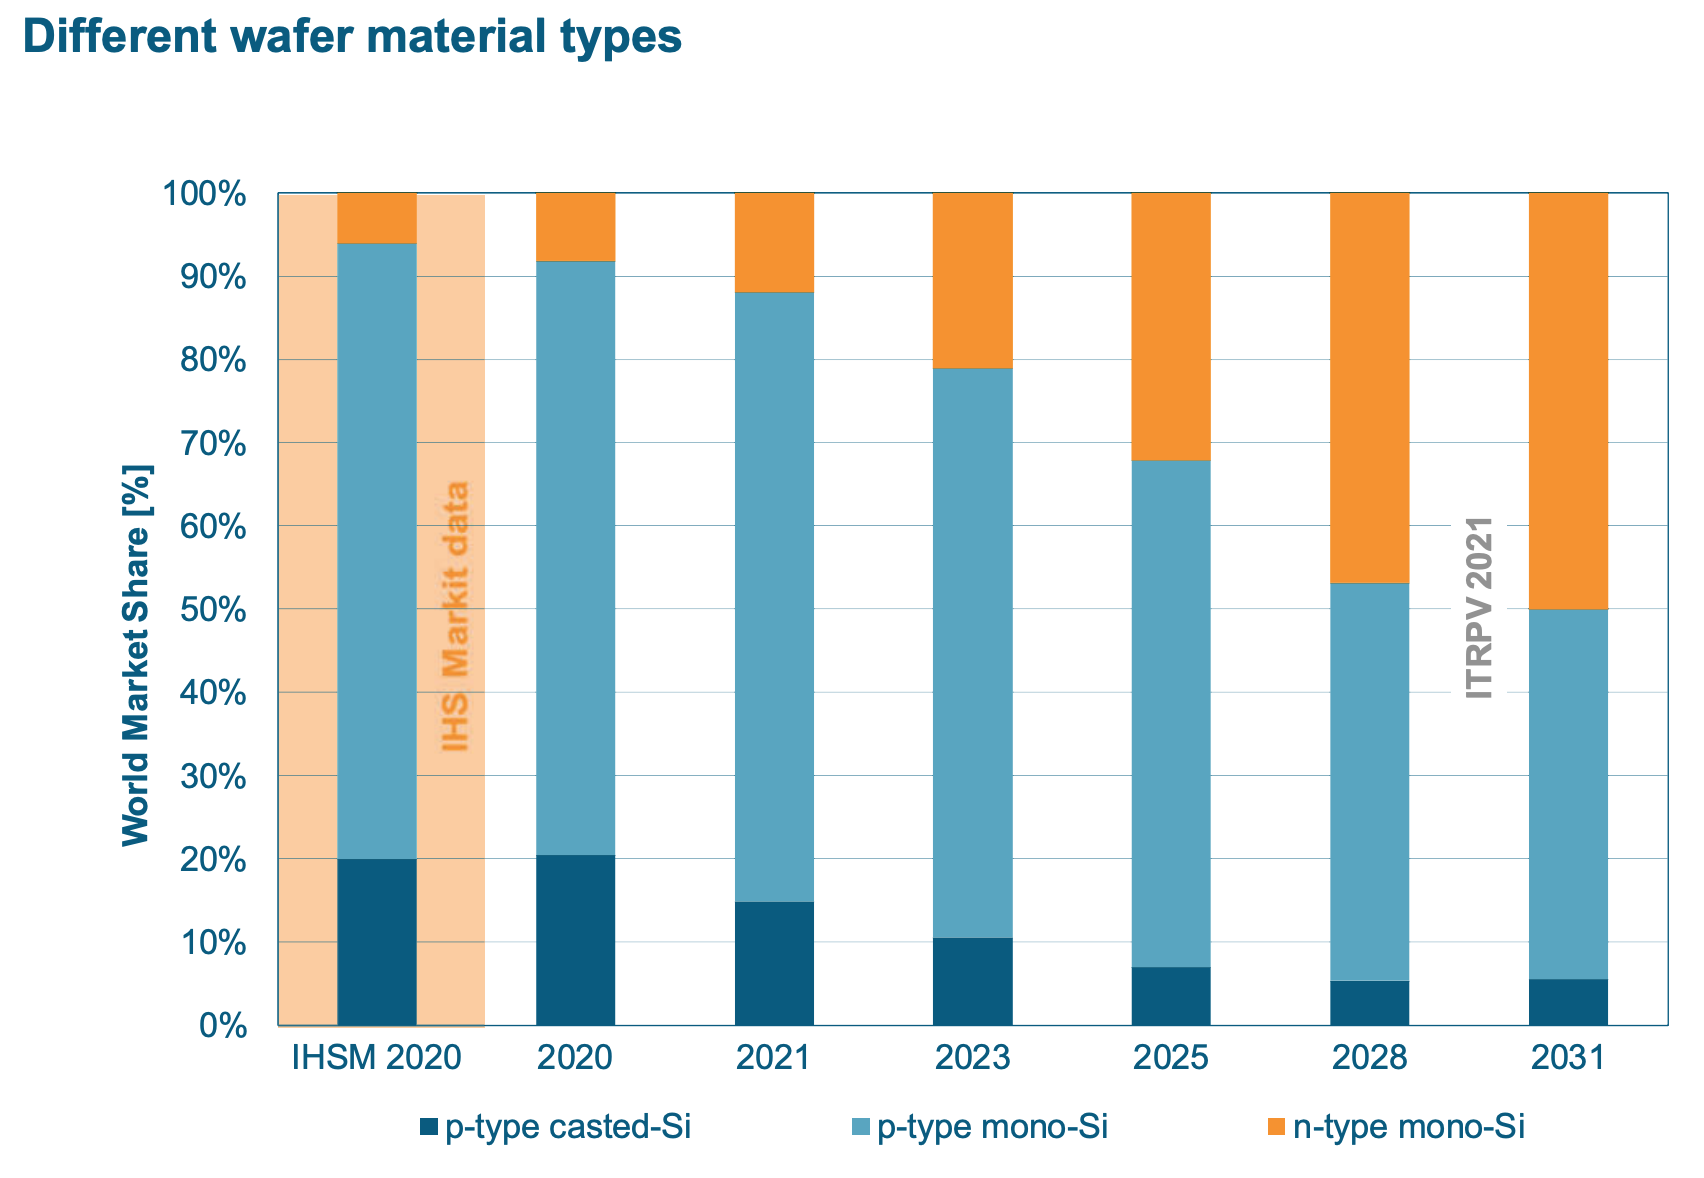 PV cell materials 2020 to 2031